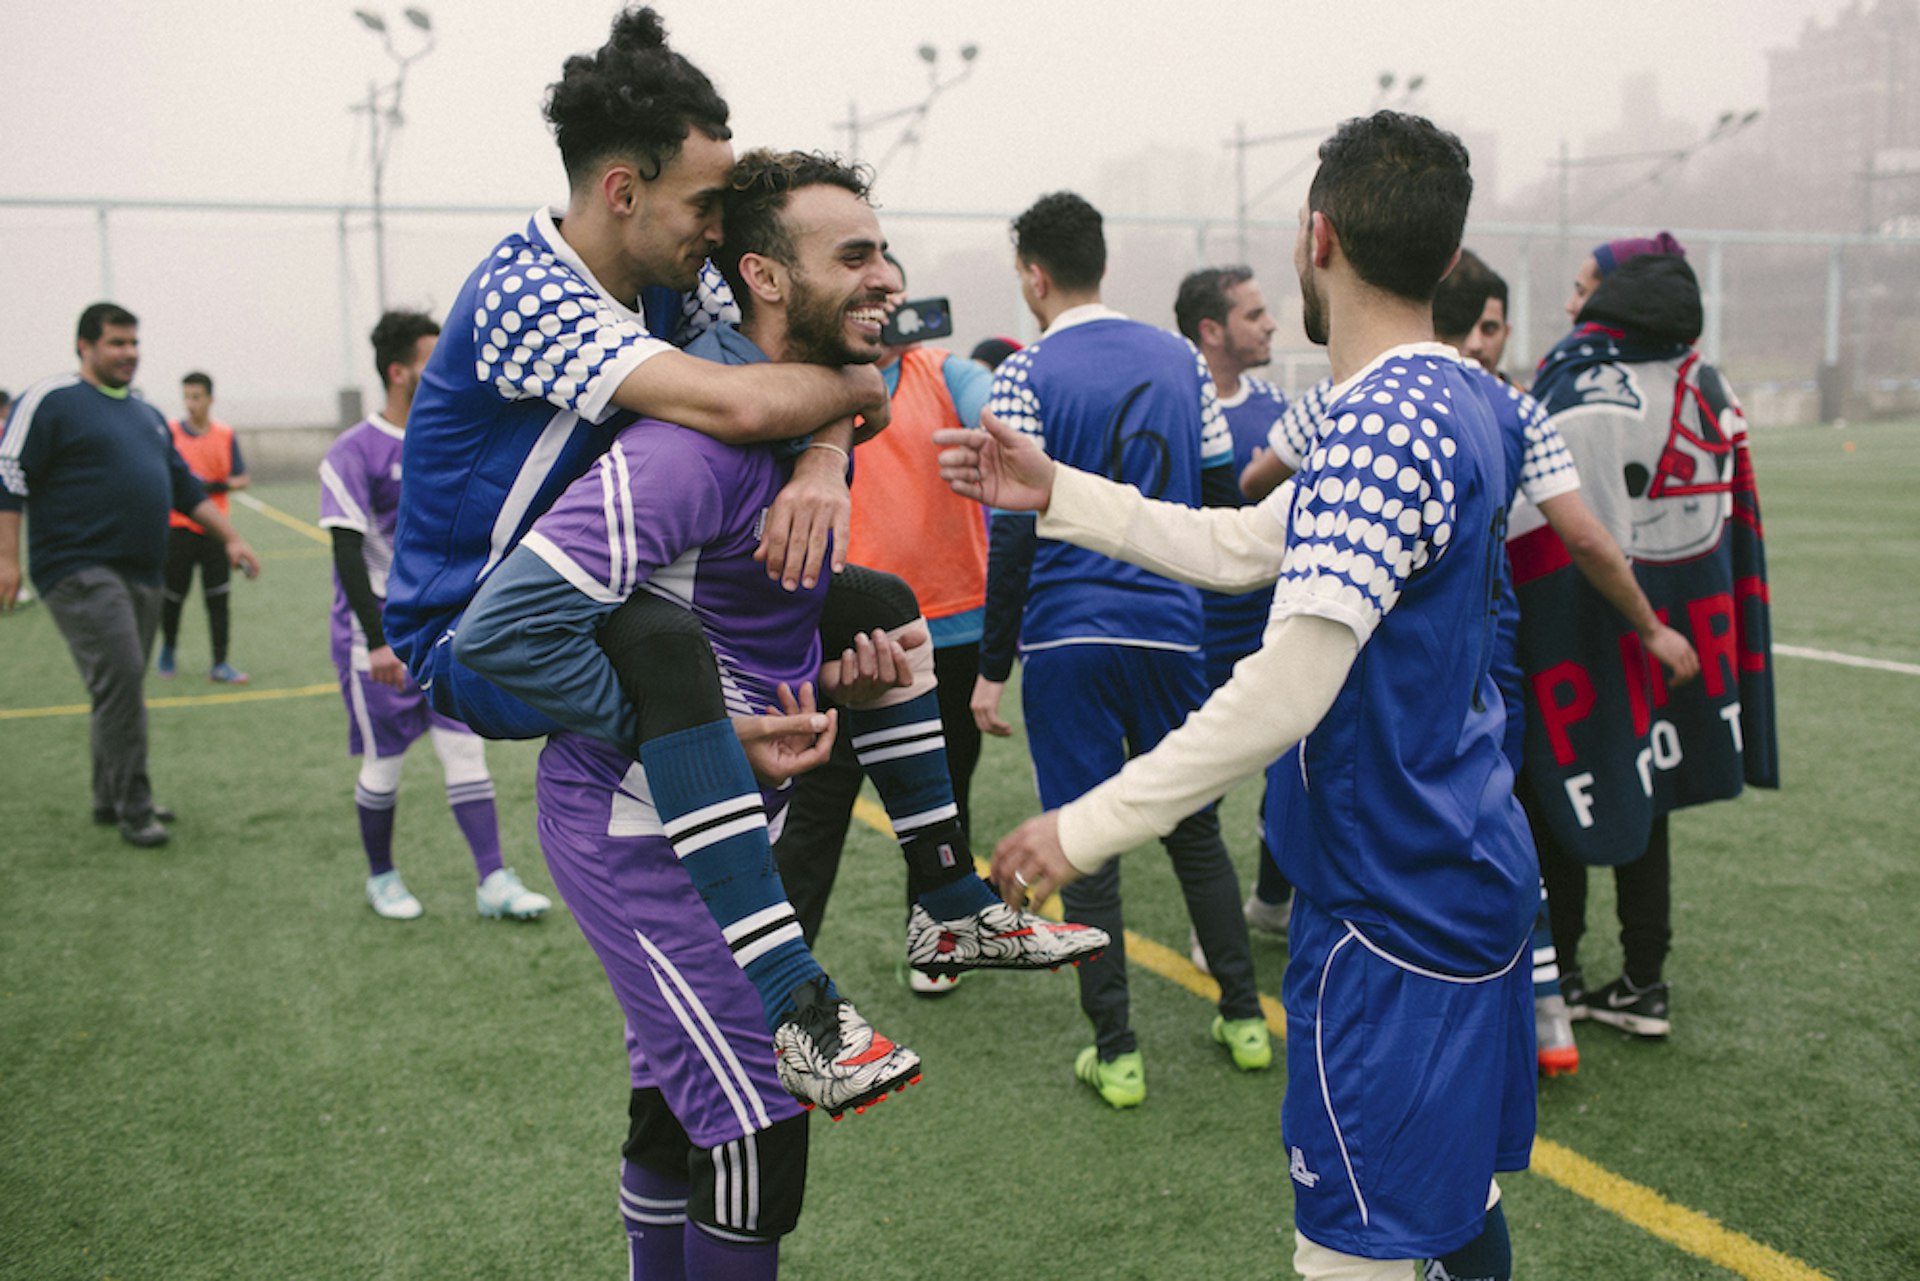 Yosef Aymar and Ahmed Elsamet joke around with their teammates after a training session.